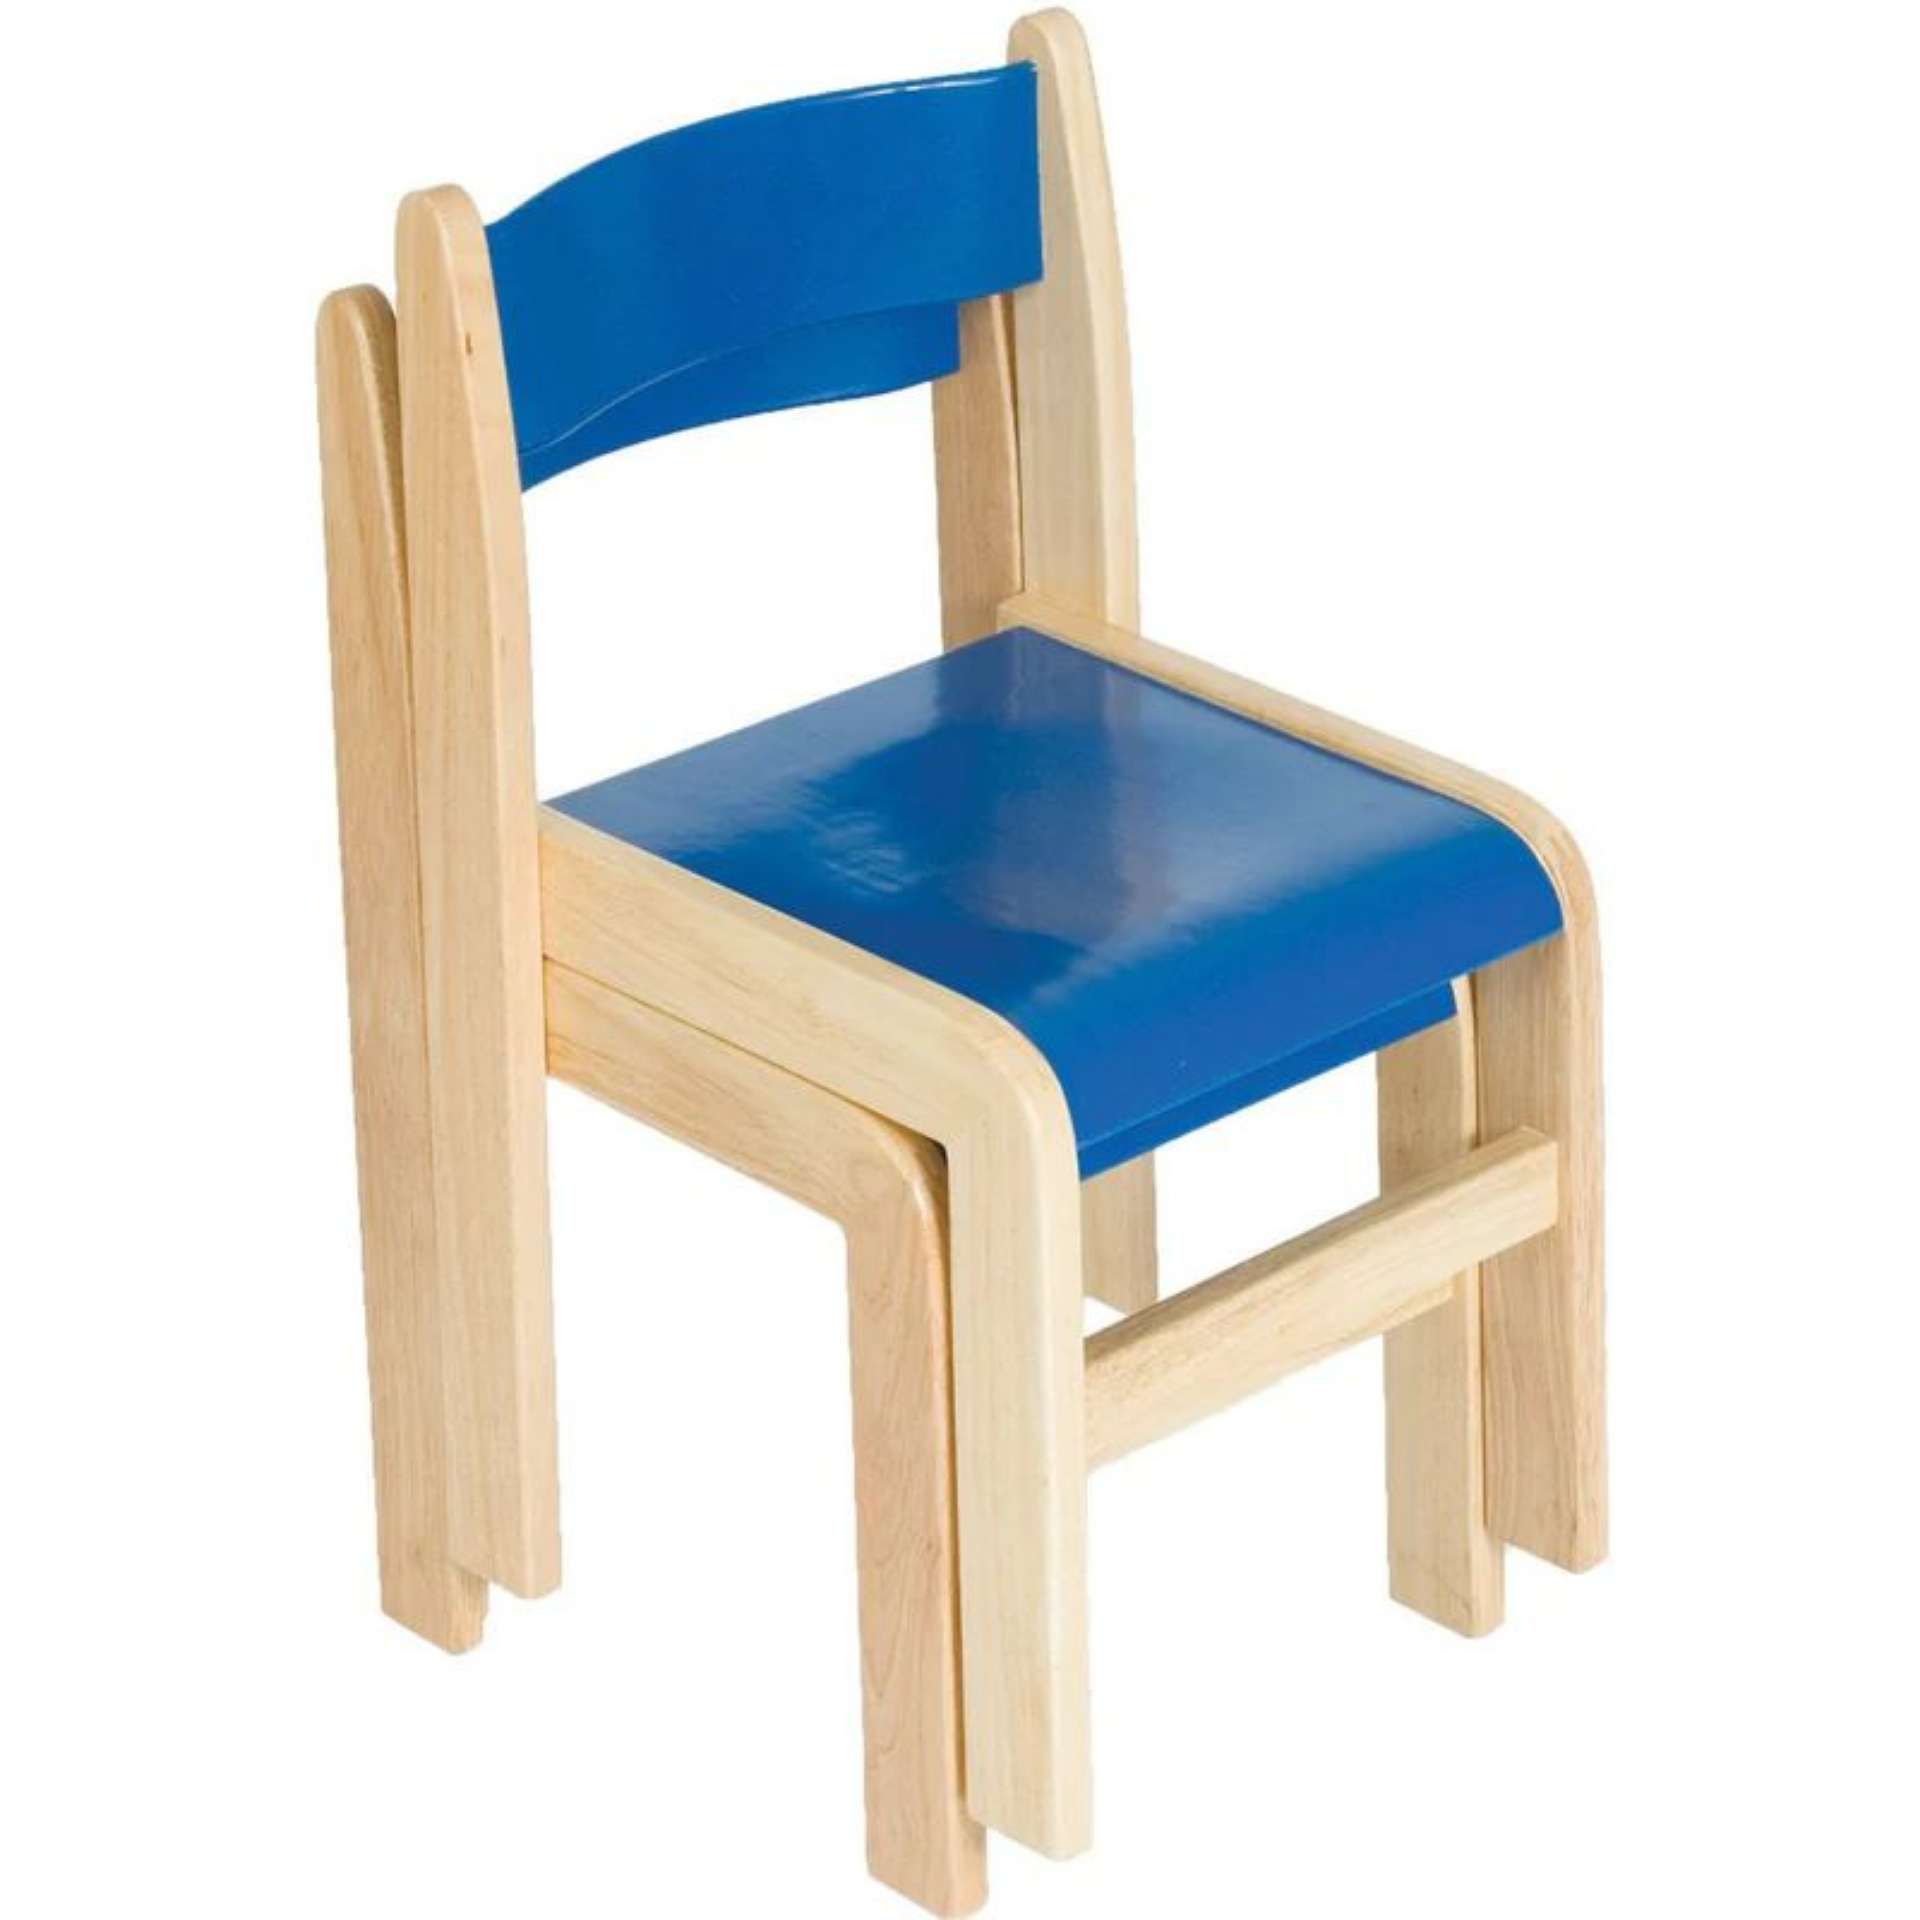 Pallet to Contain 8 x Sets of 2 Tuf Class Wooden Chair Blue R16-4. RRP £175 per set, total pallet